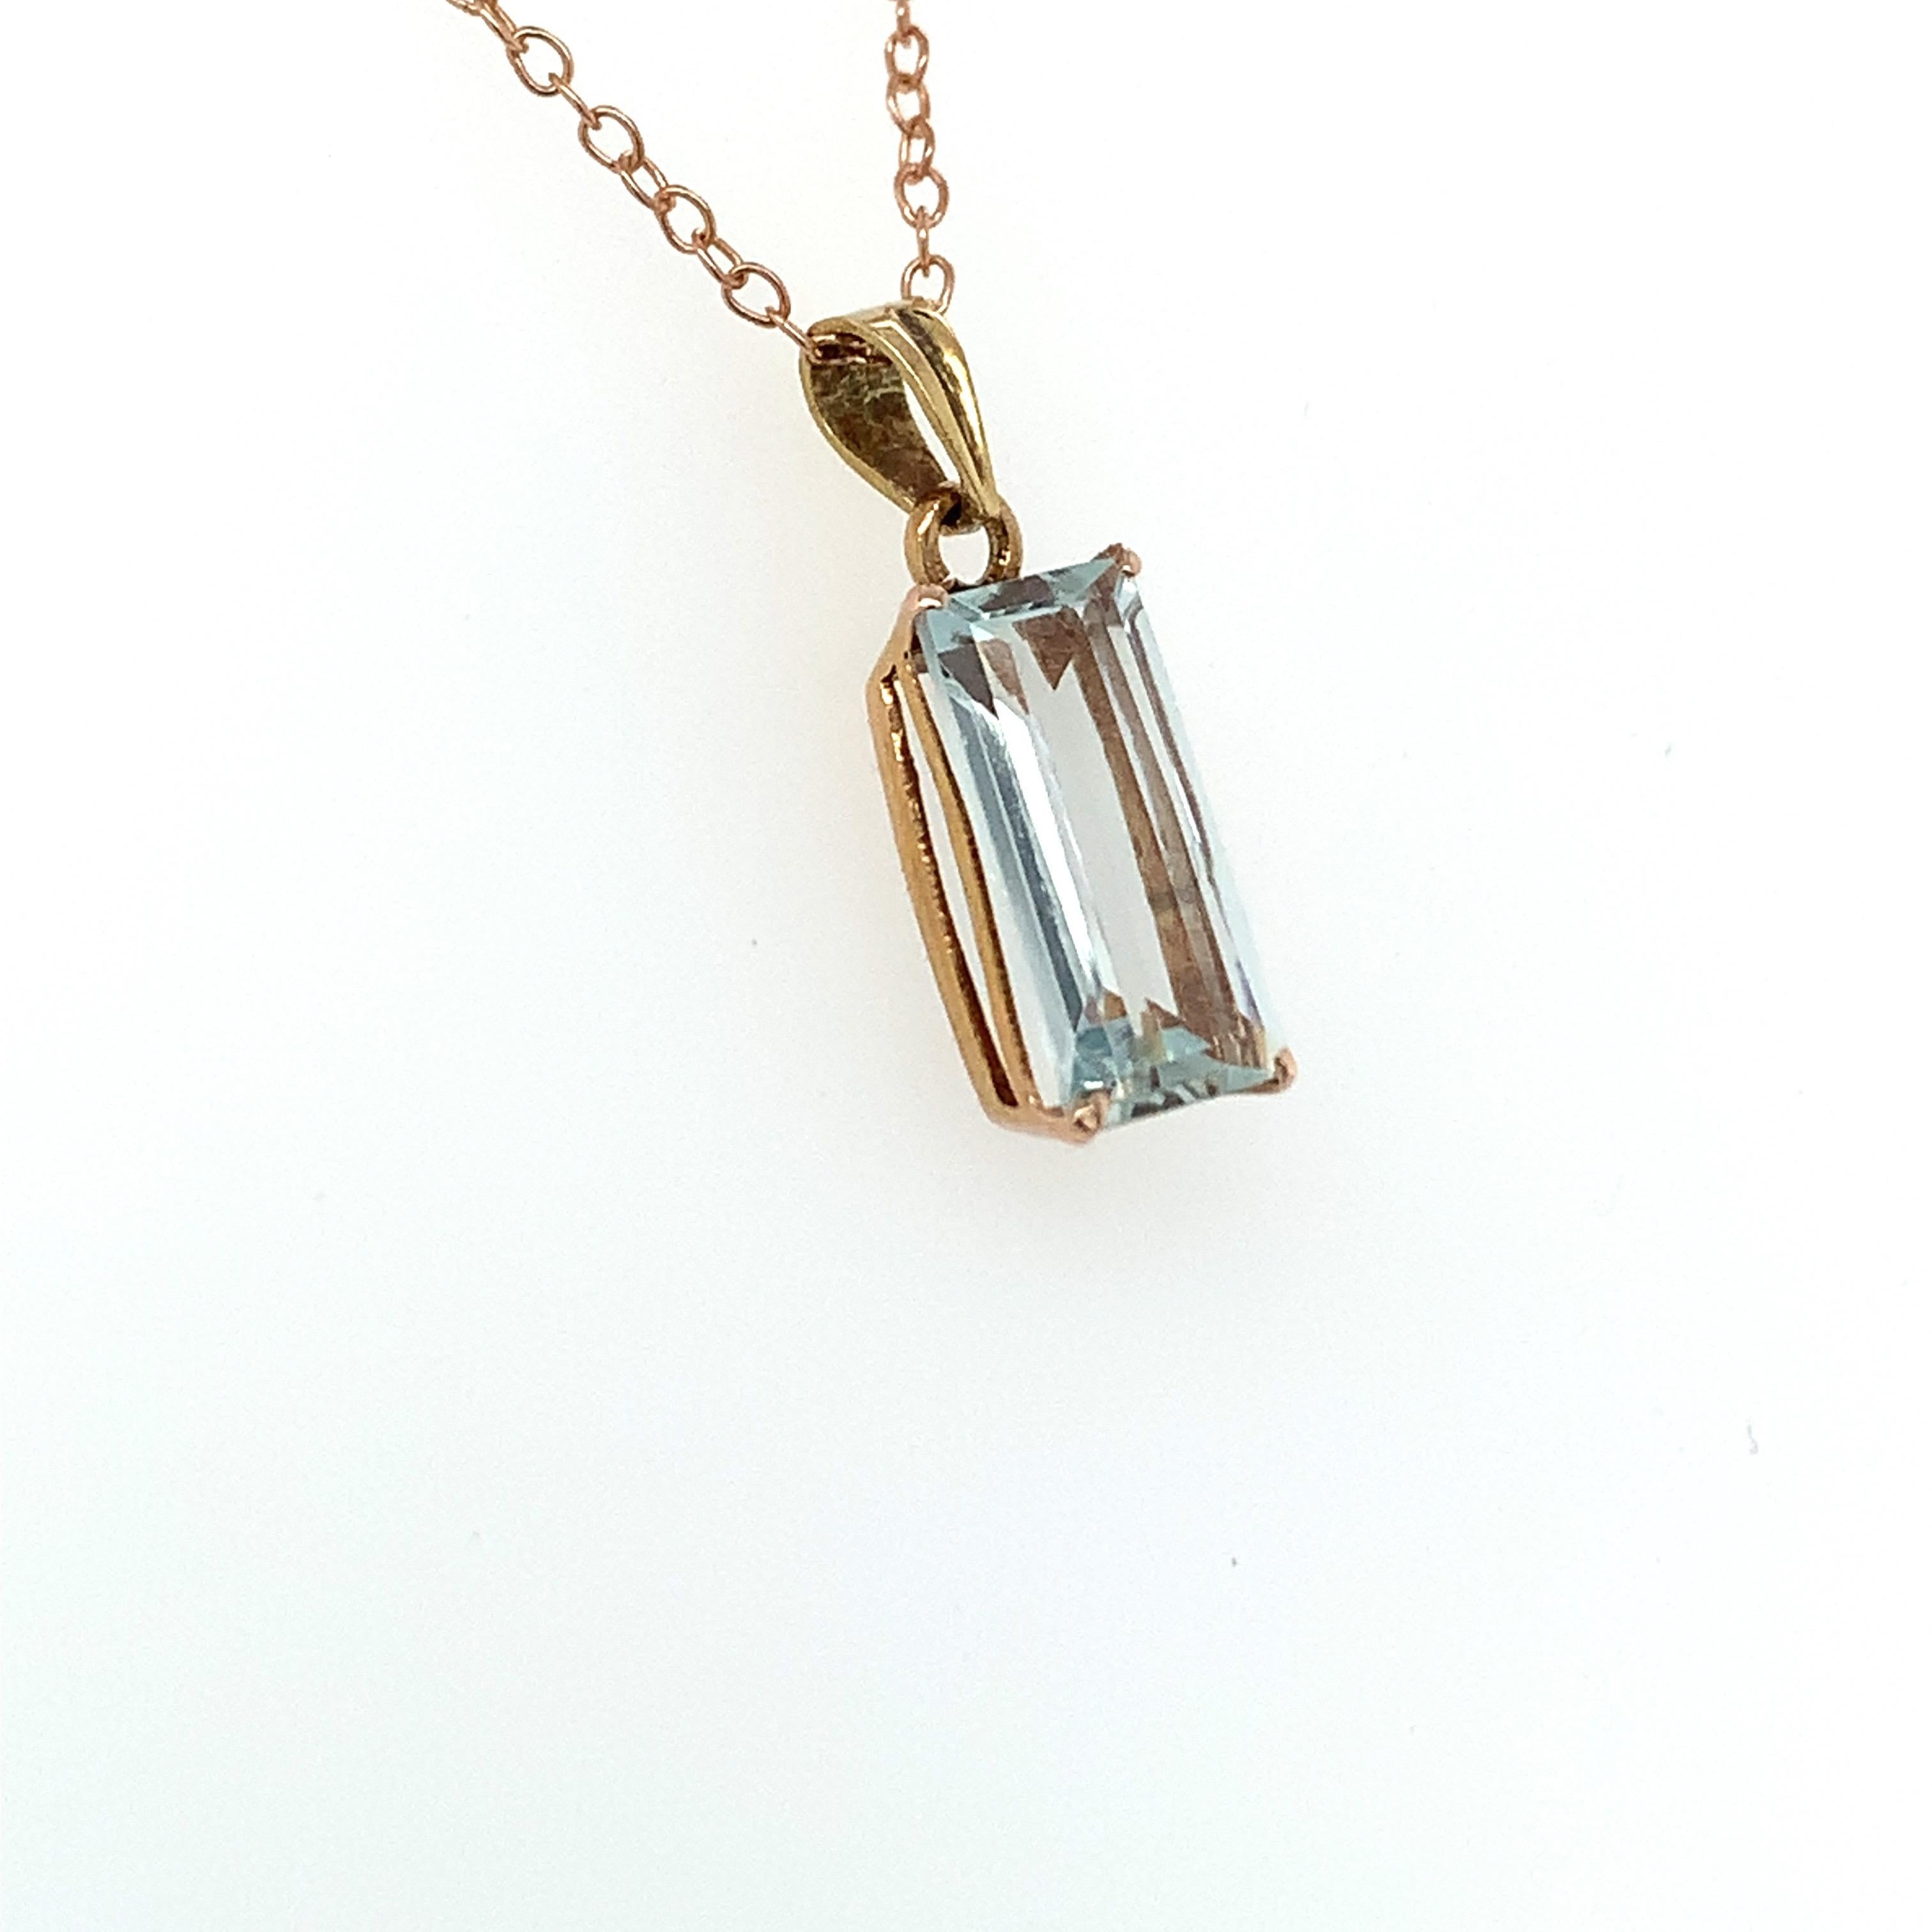 Hand cut and polished natural aquamarine is crafted with hand in 14K yellow gold. 
Ideal for daily casual wear.
Chain is not included. 
Image is enlarged to get a closer view.
Ethically sourced natural gem stone.